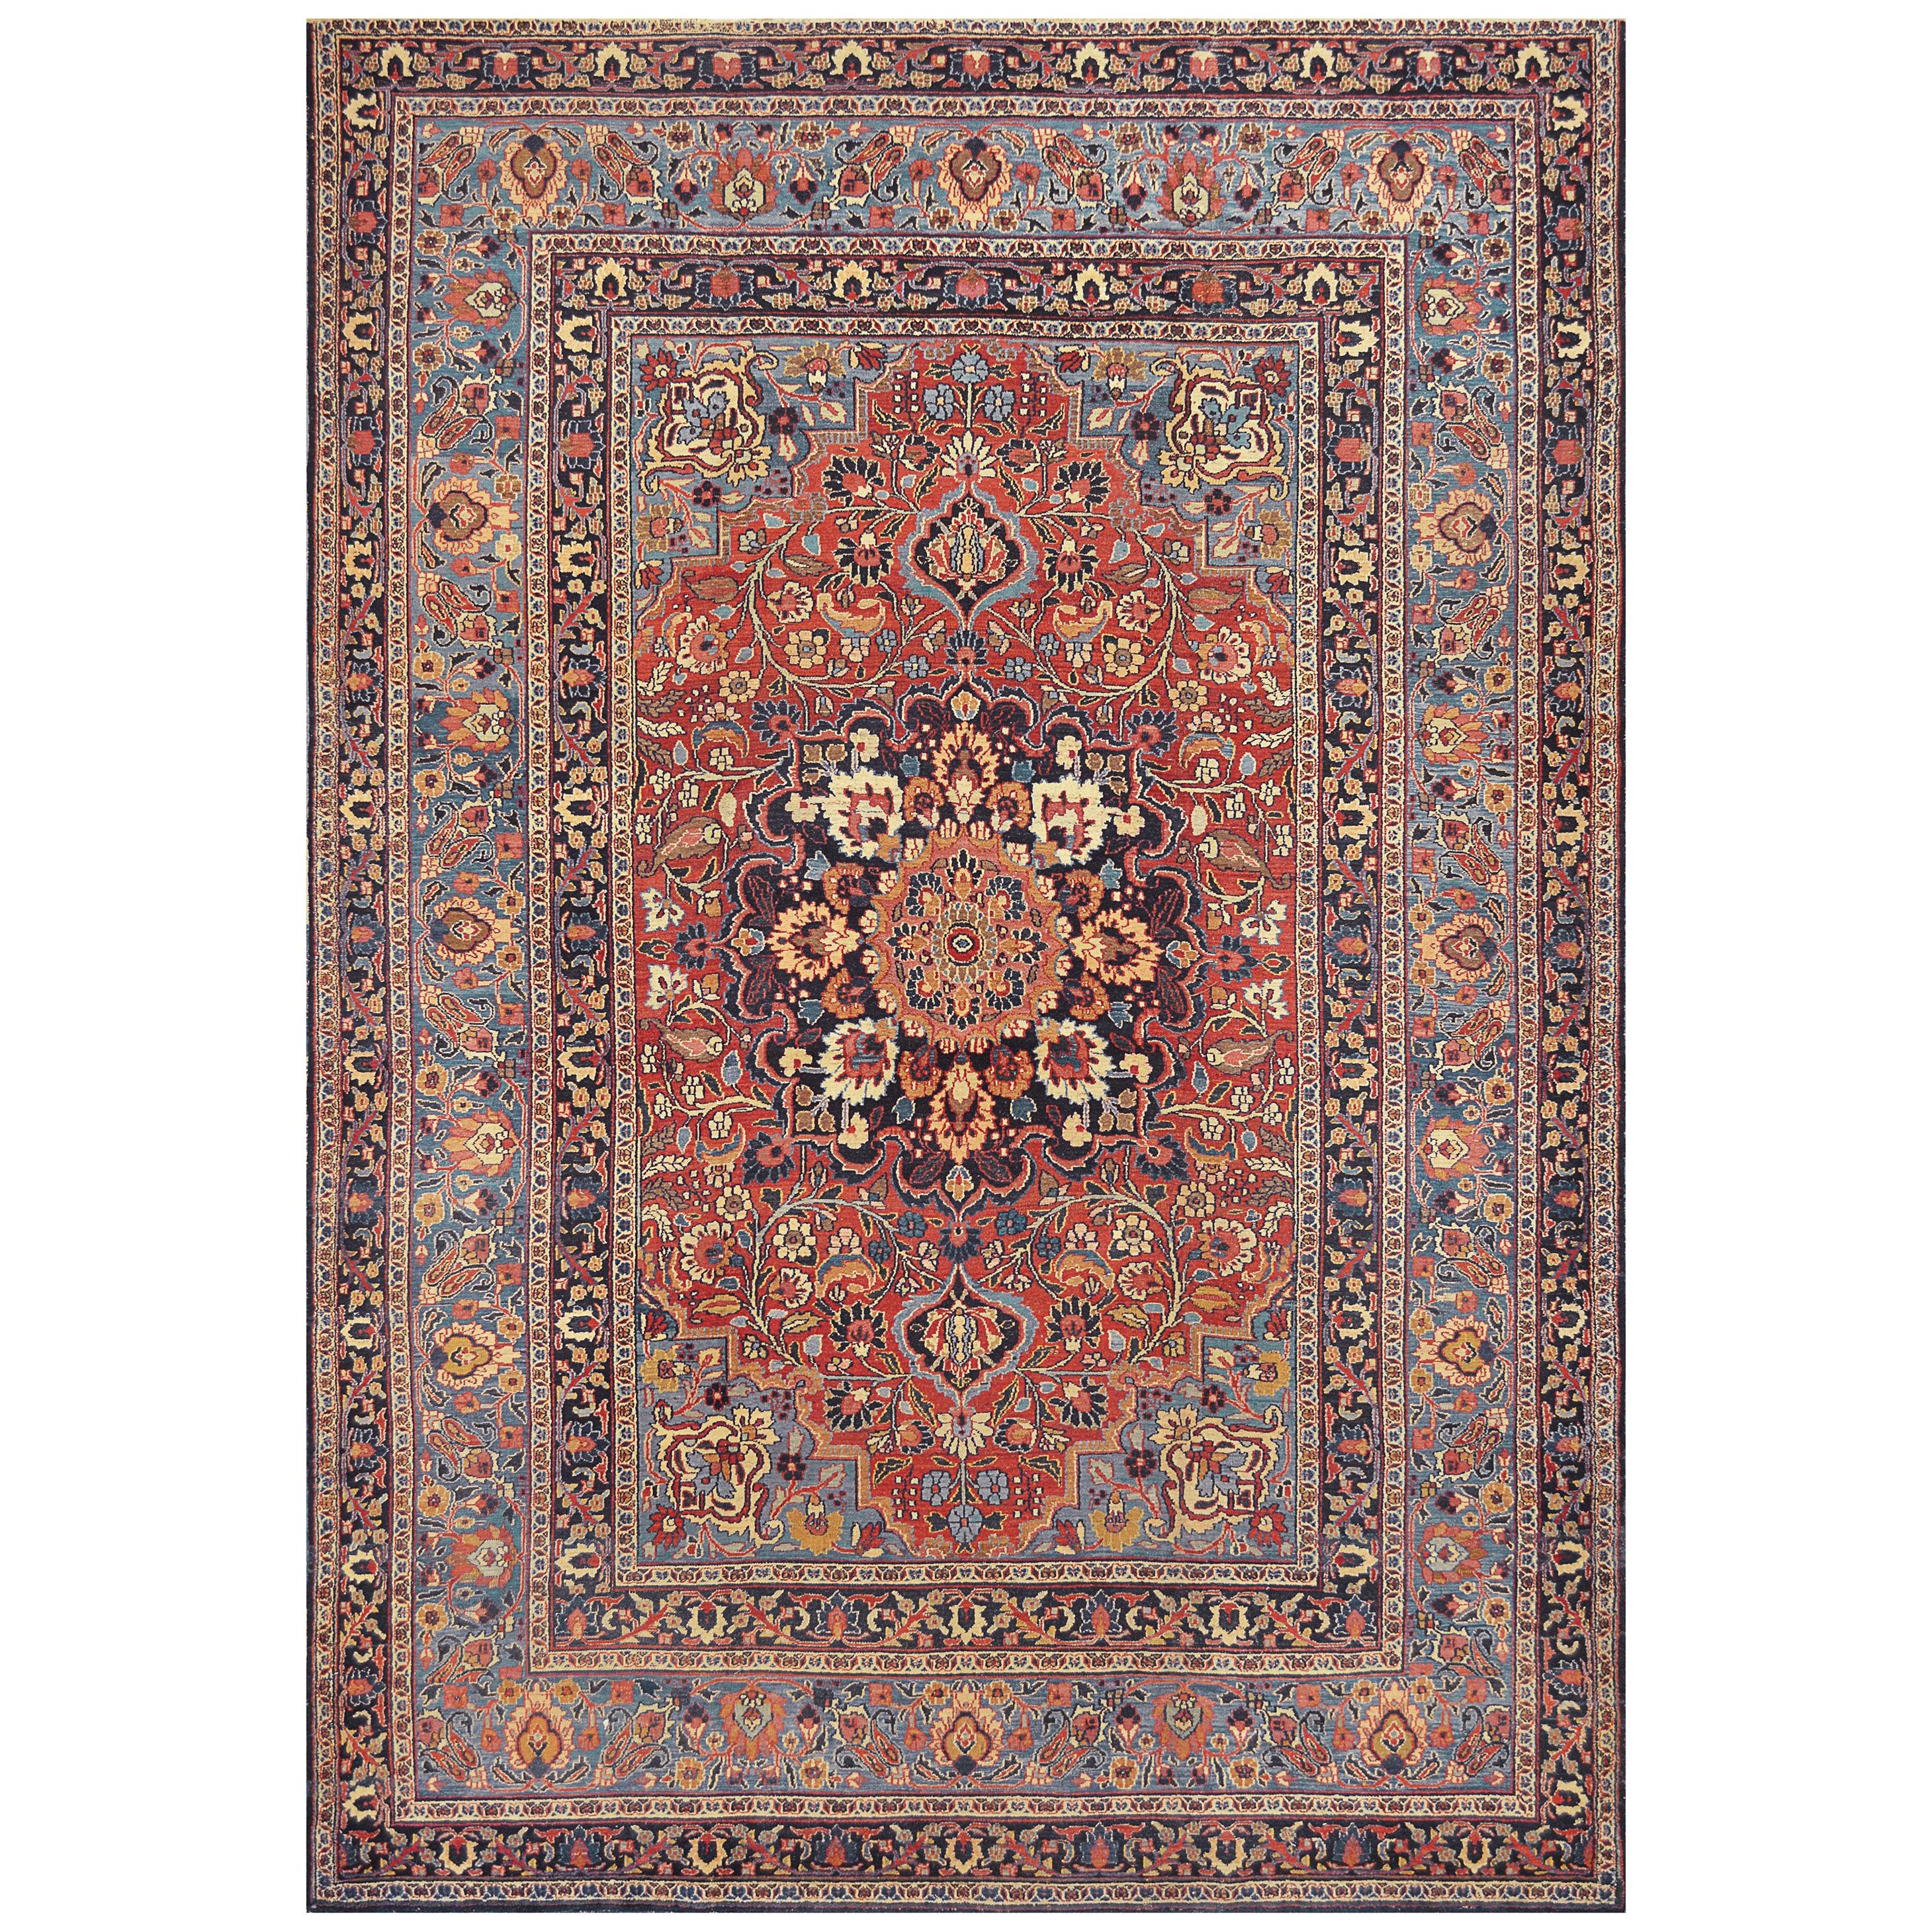 Late 19th Century Khorassan Rug from North East Persia